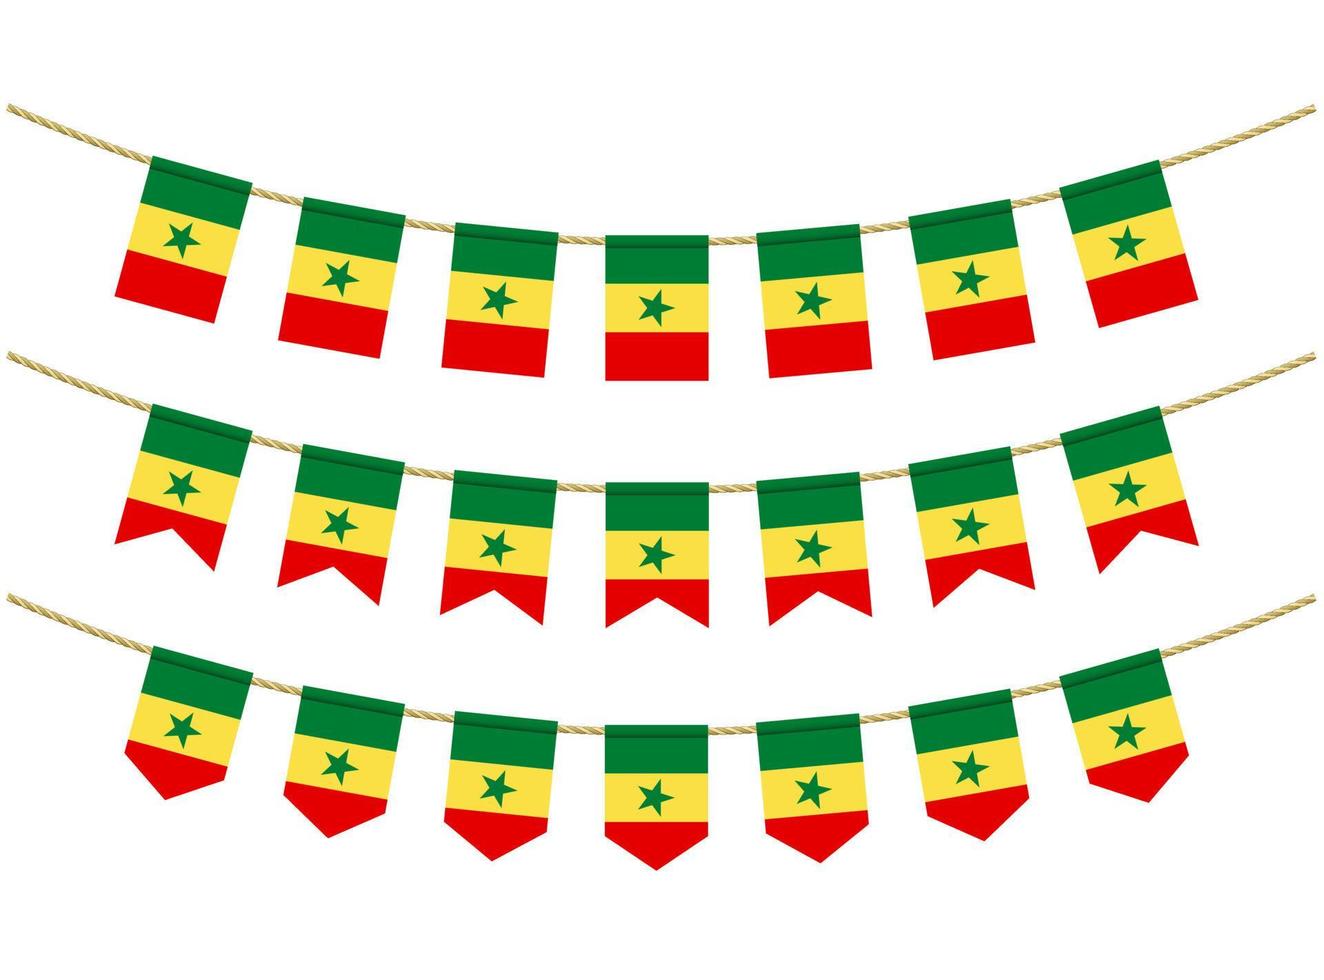 Senegal flag on the ropes on white background. Set of Patriotic bunting flags. Bunting decoration of Senegal flag vector